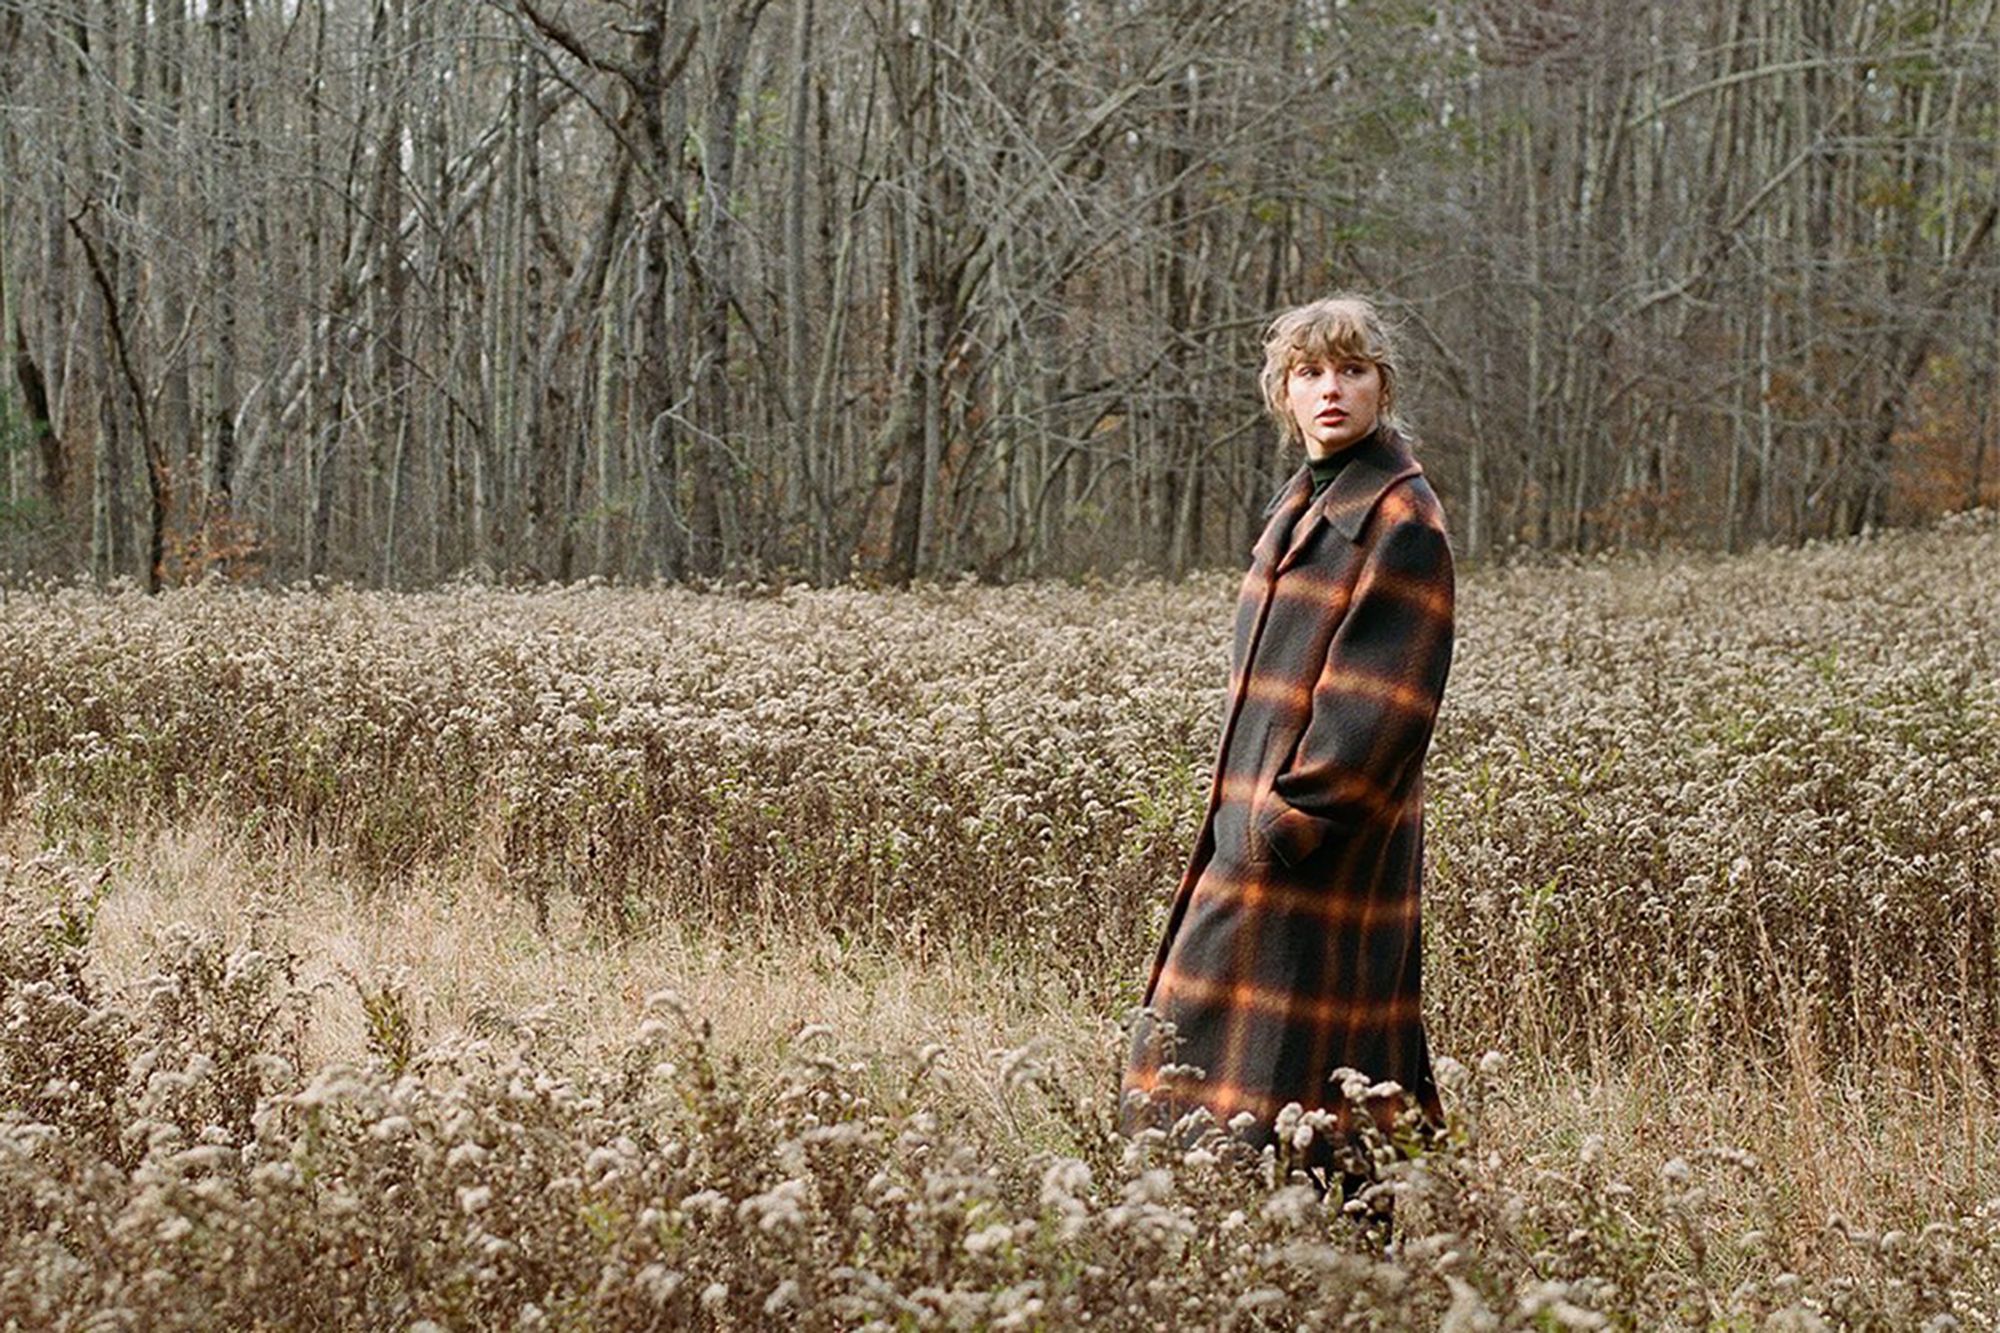 A promotional shot for the Taylor Swift album Evermore. Taylor Swift looking pensive wearing a flannel coat in an overgrown field with barren trees in the background, from the promotional shots for Evermore.